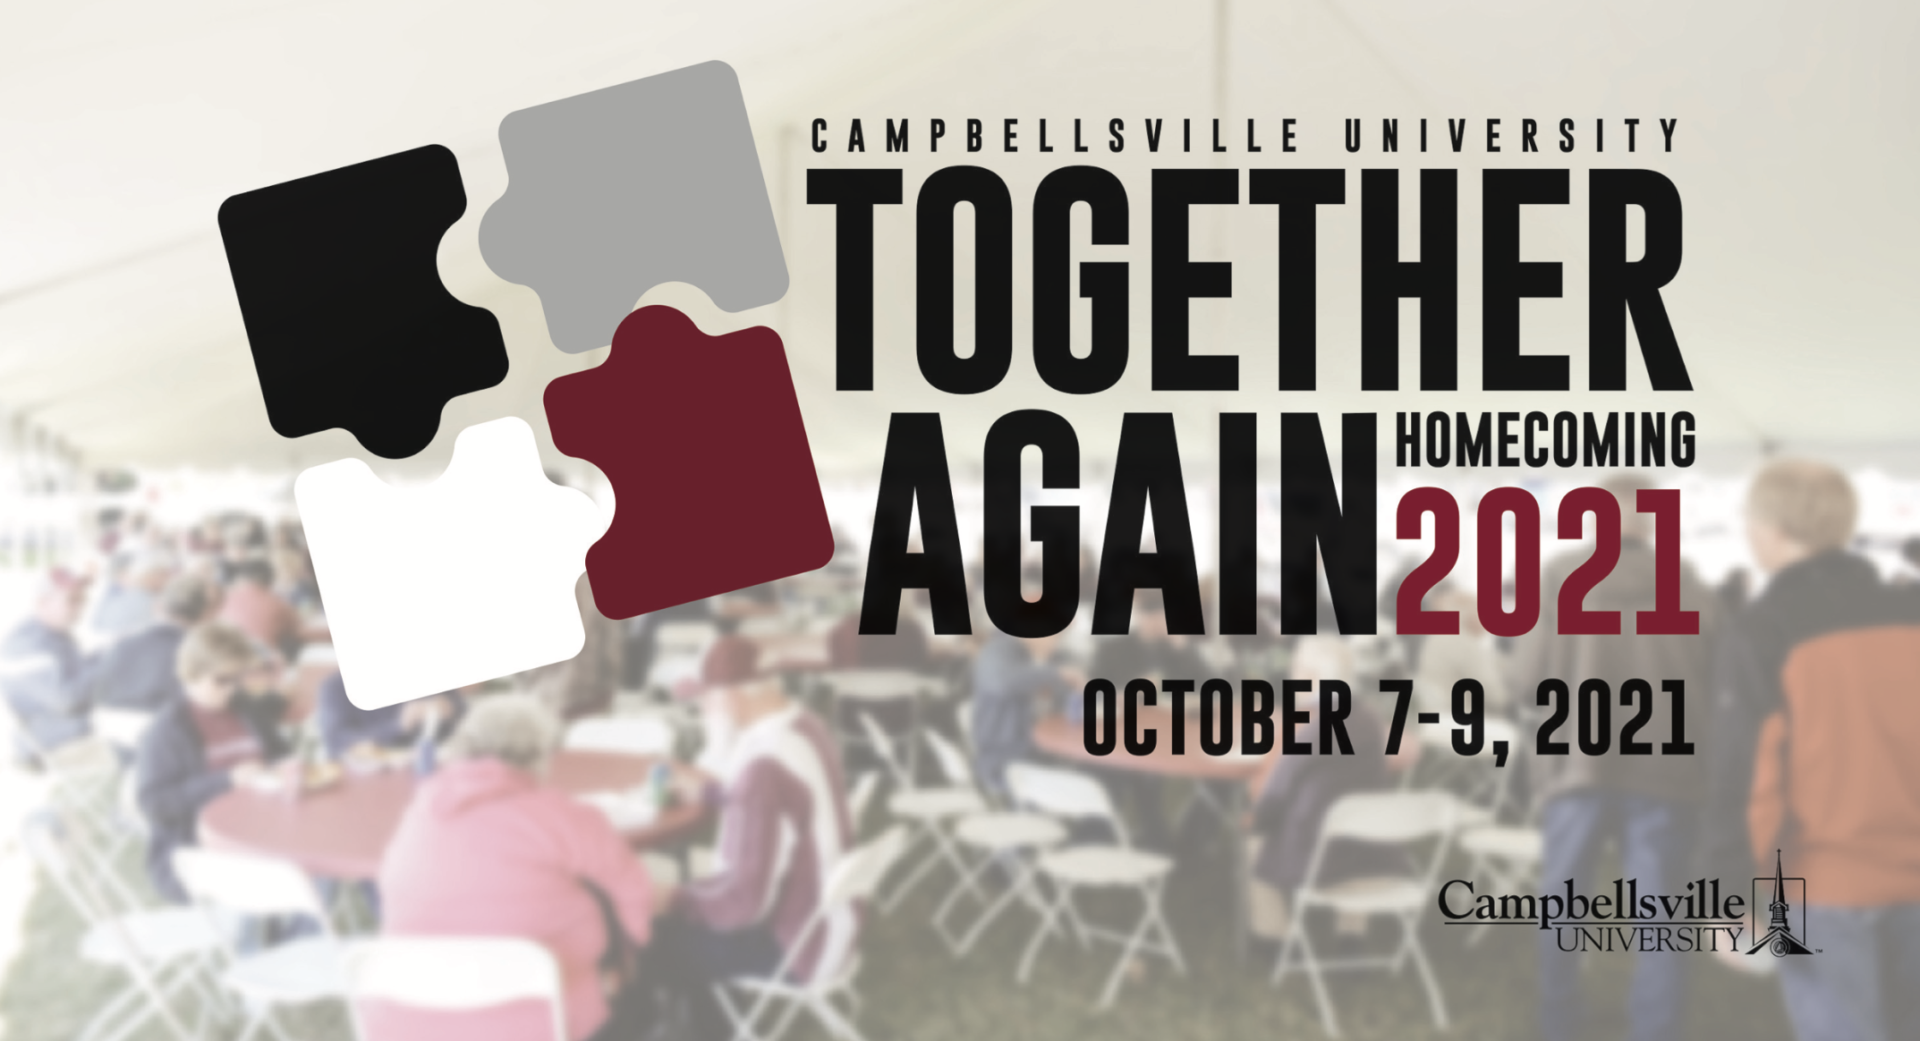 Campbellsville University theme for 2021 is ‘Together Again